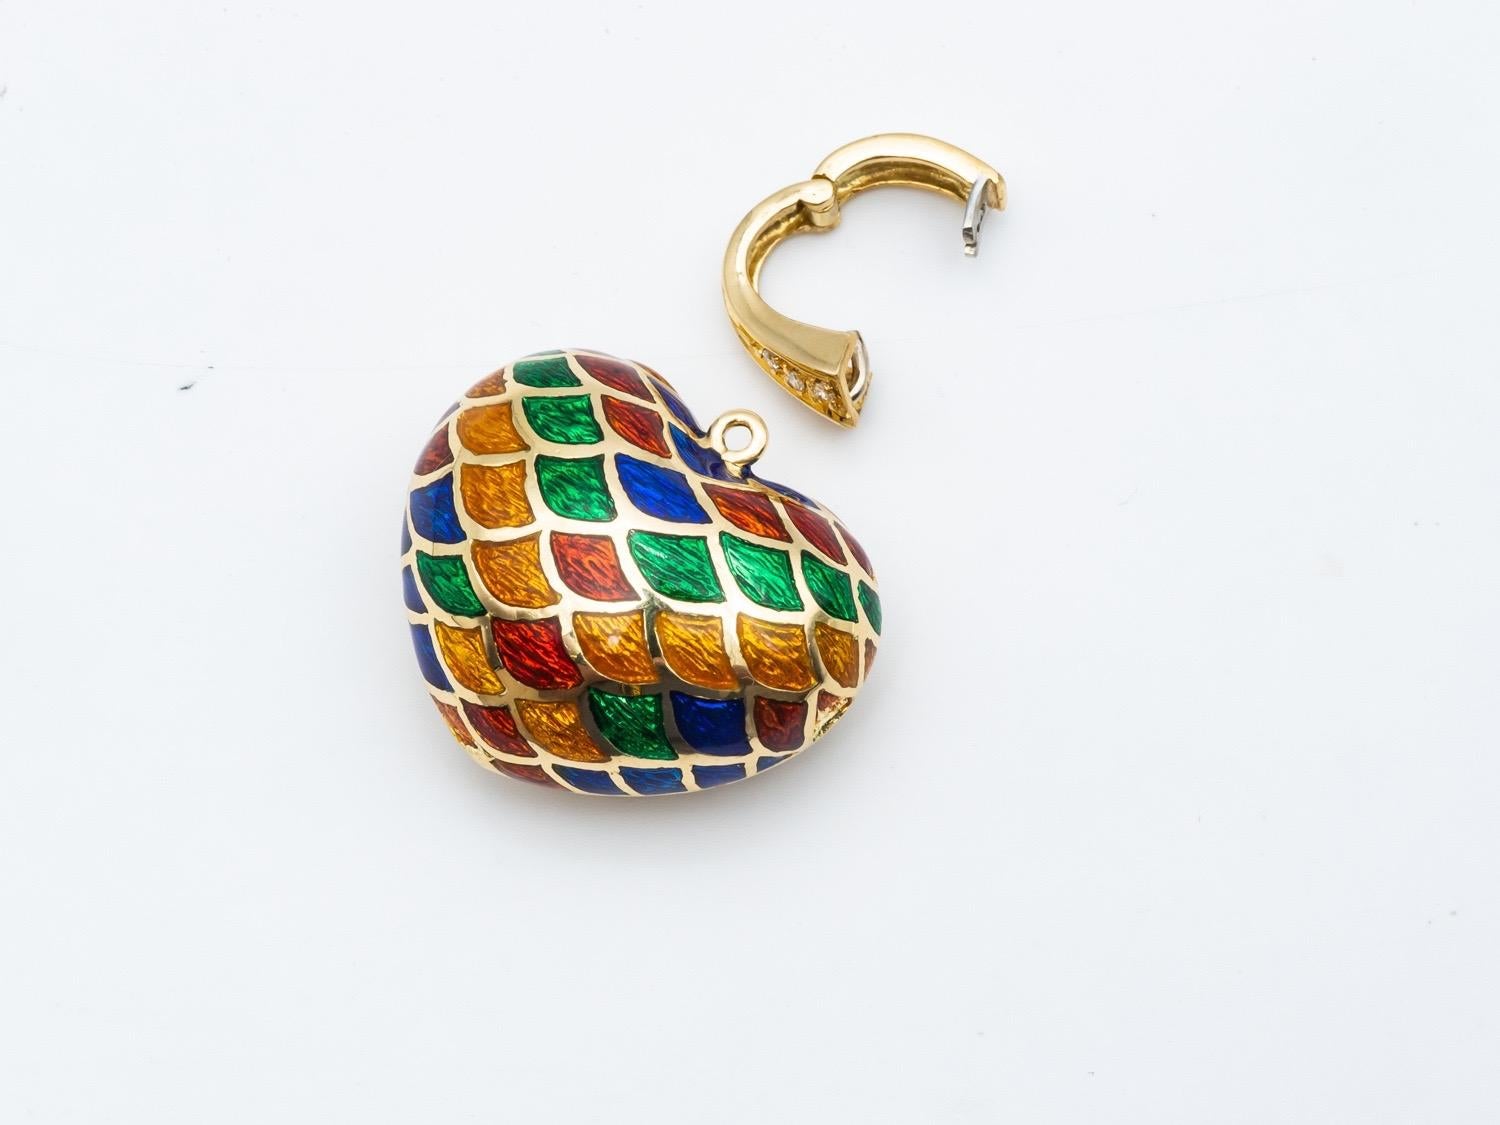 Pendant with harlequin color tailside enamels on 18 karat yellow Gold  and inlaid with 6 Diamonds. This pendant will bring color as well as brilliance to the occasions of wearing it. Multi-functional hanging system. The pendant has artistic